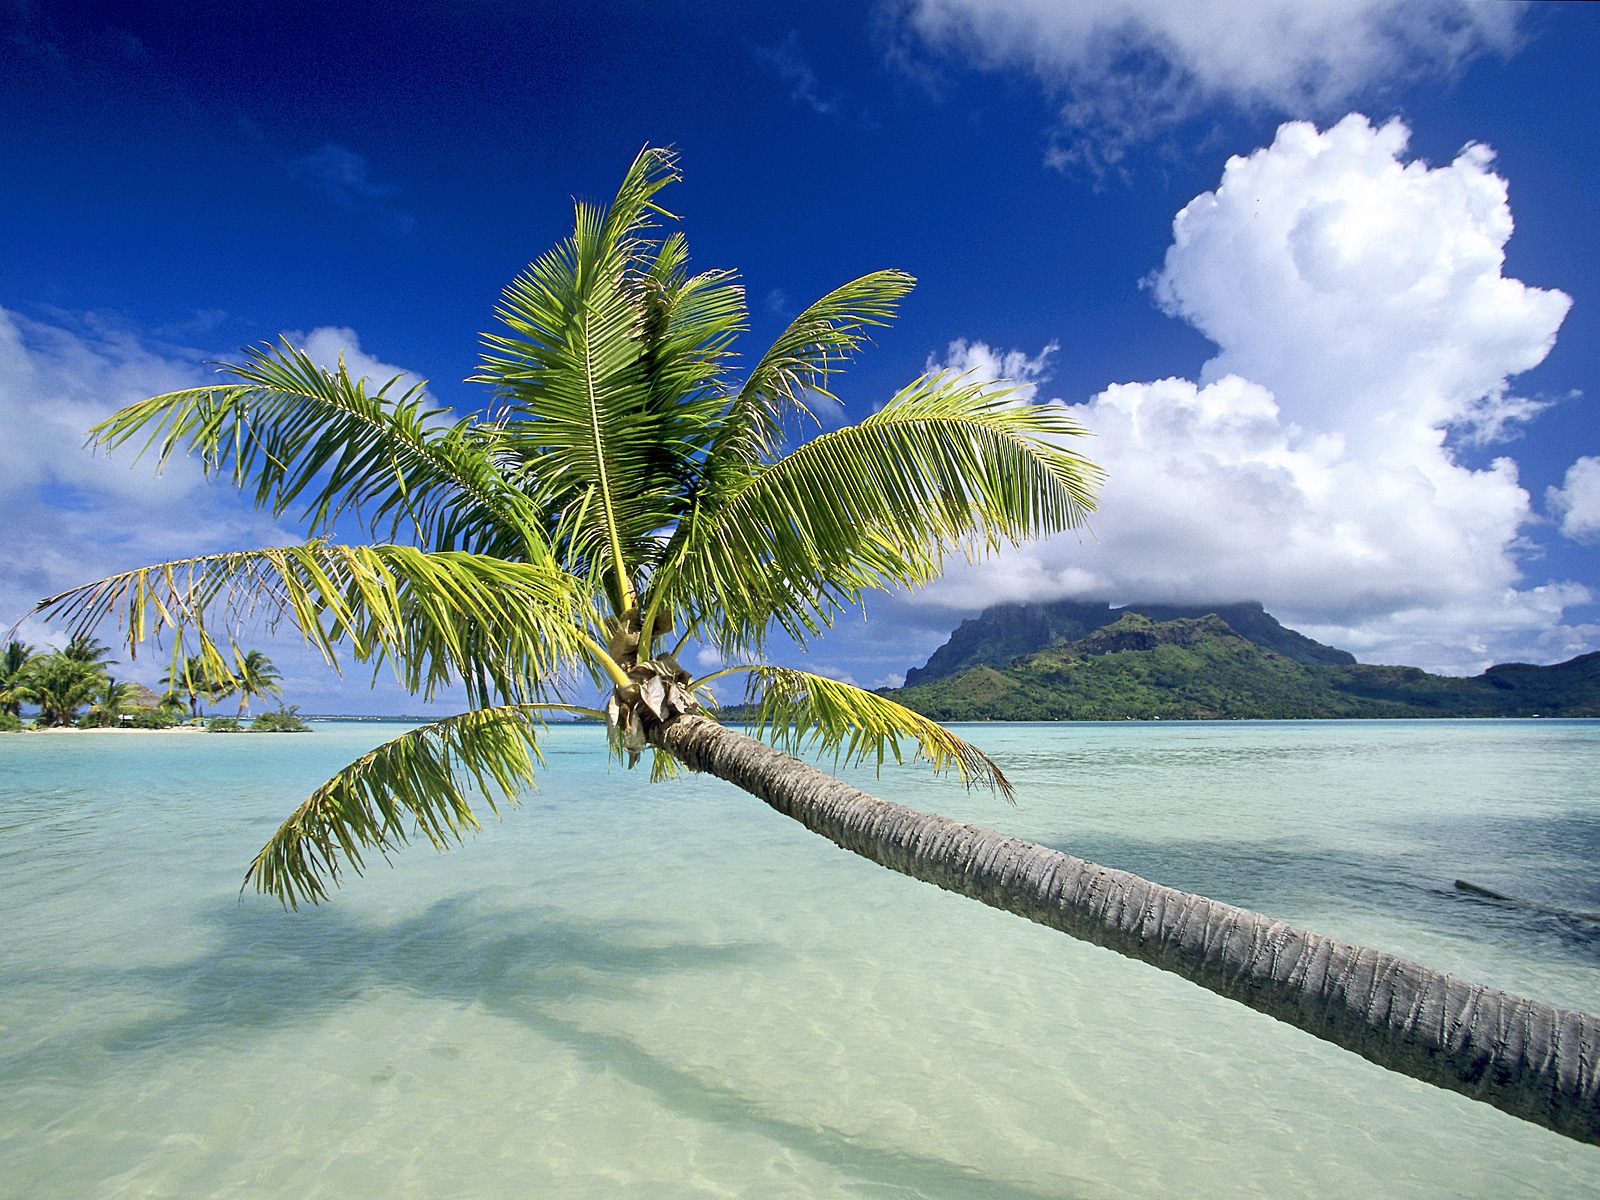 You are in Pictures Wallpaper Tropical Paradise